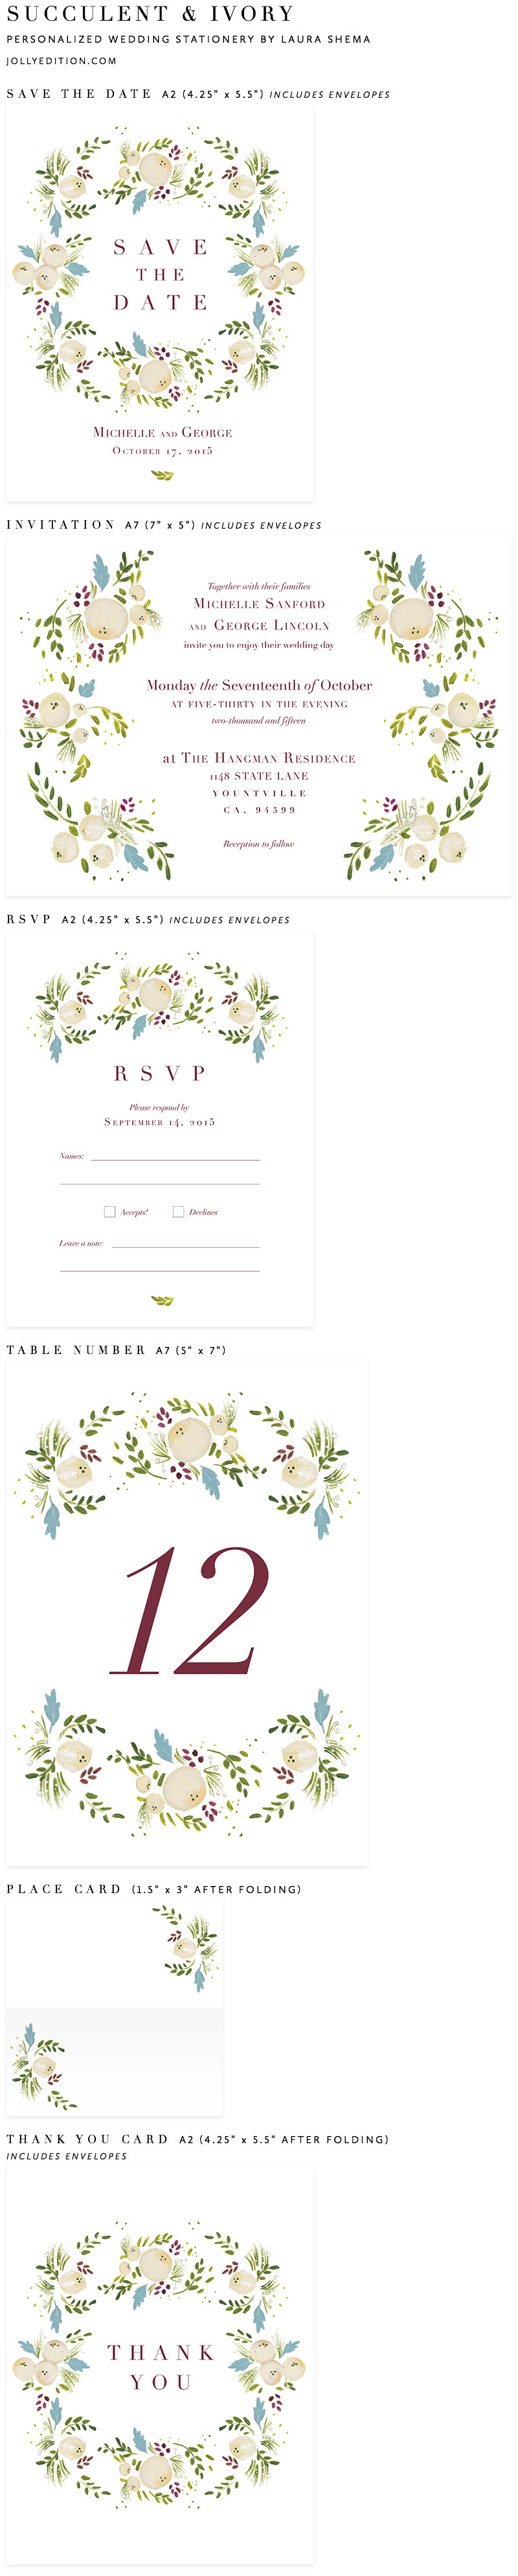 Succulent and Ivory Personalized Wedding Stationery by Laura Shema of Jolly Edition